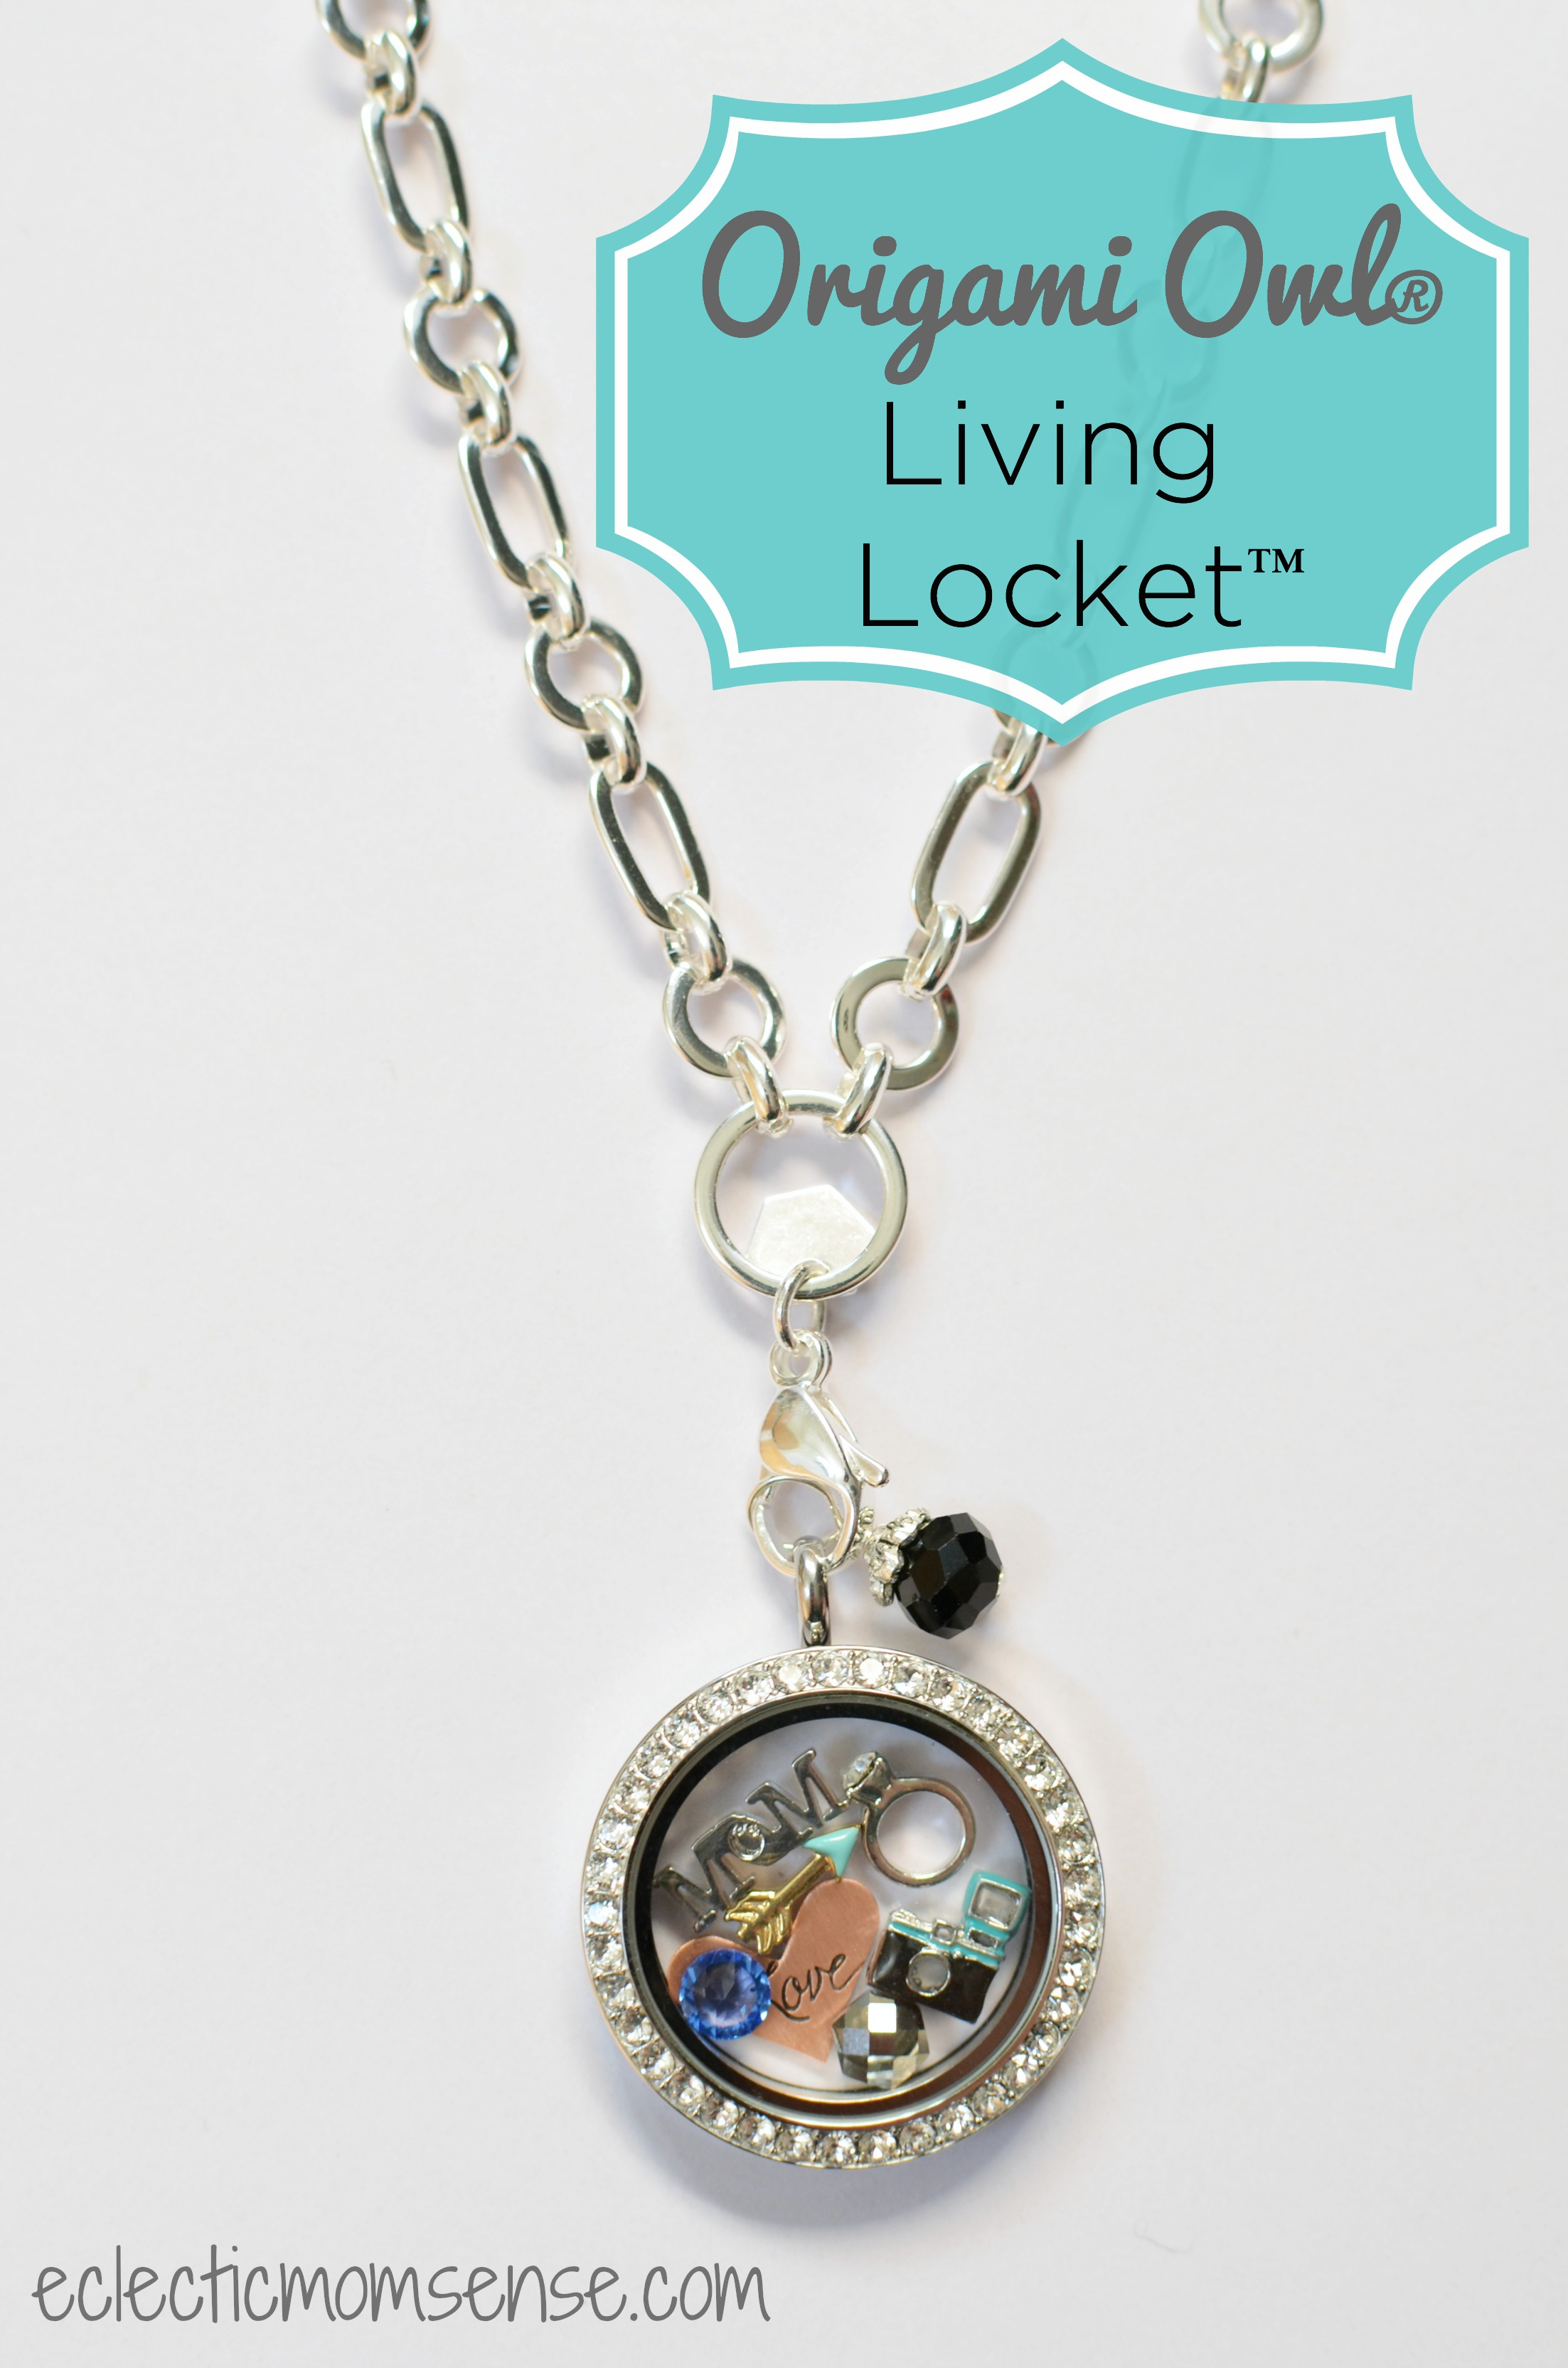 Disney Origami Owl Charms Origami Owl Living Locket Building Your Story Eclectic Momsense